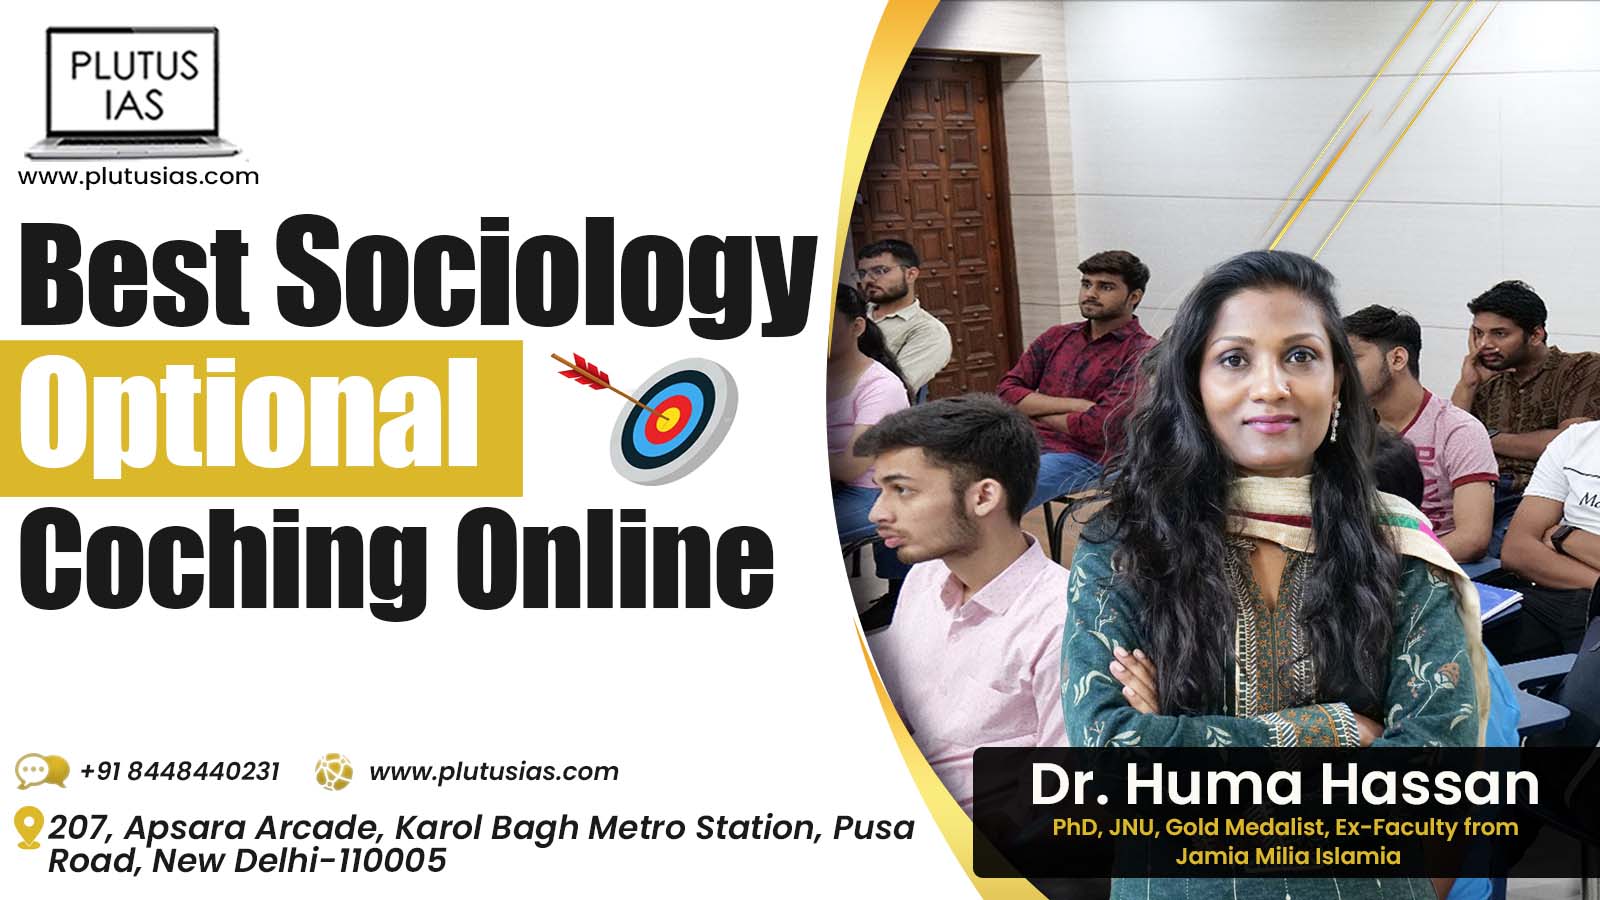 SOCIOLOGY OPTIONAL COACHING ONLINE BY PLUTUS IAS